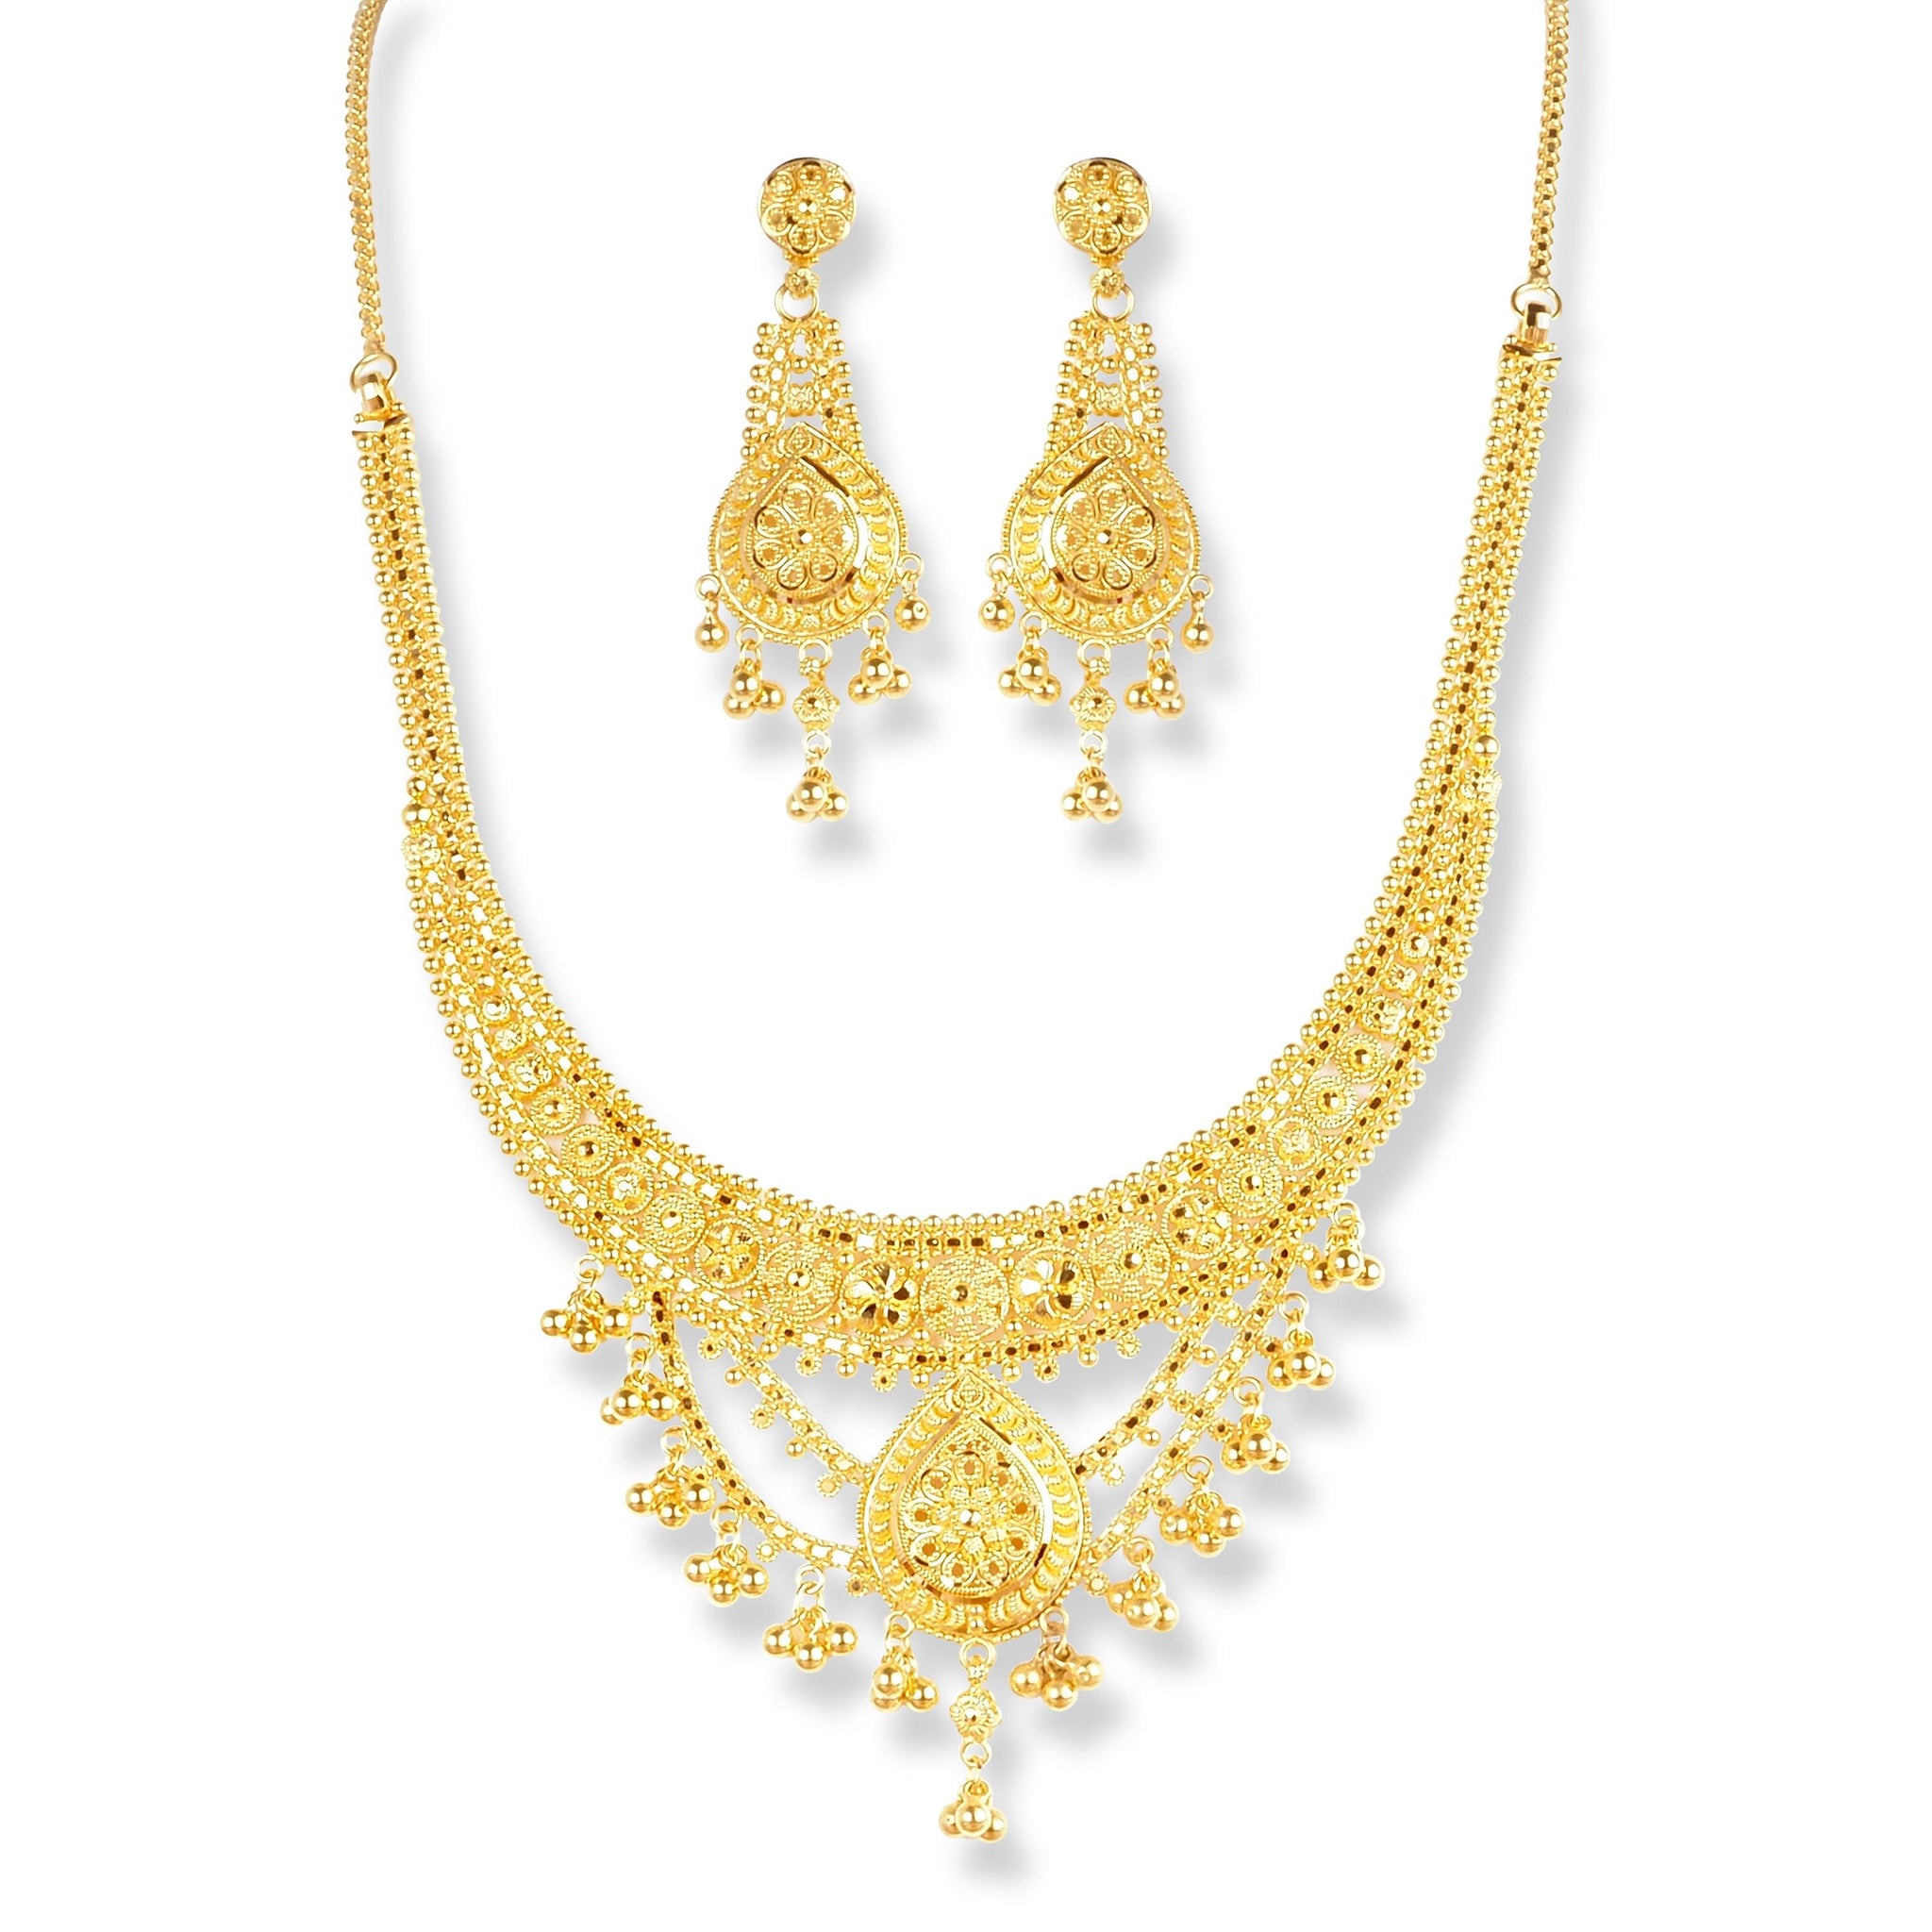 22ct Gold Filigree work Design Set with Beaded Drops N-7925